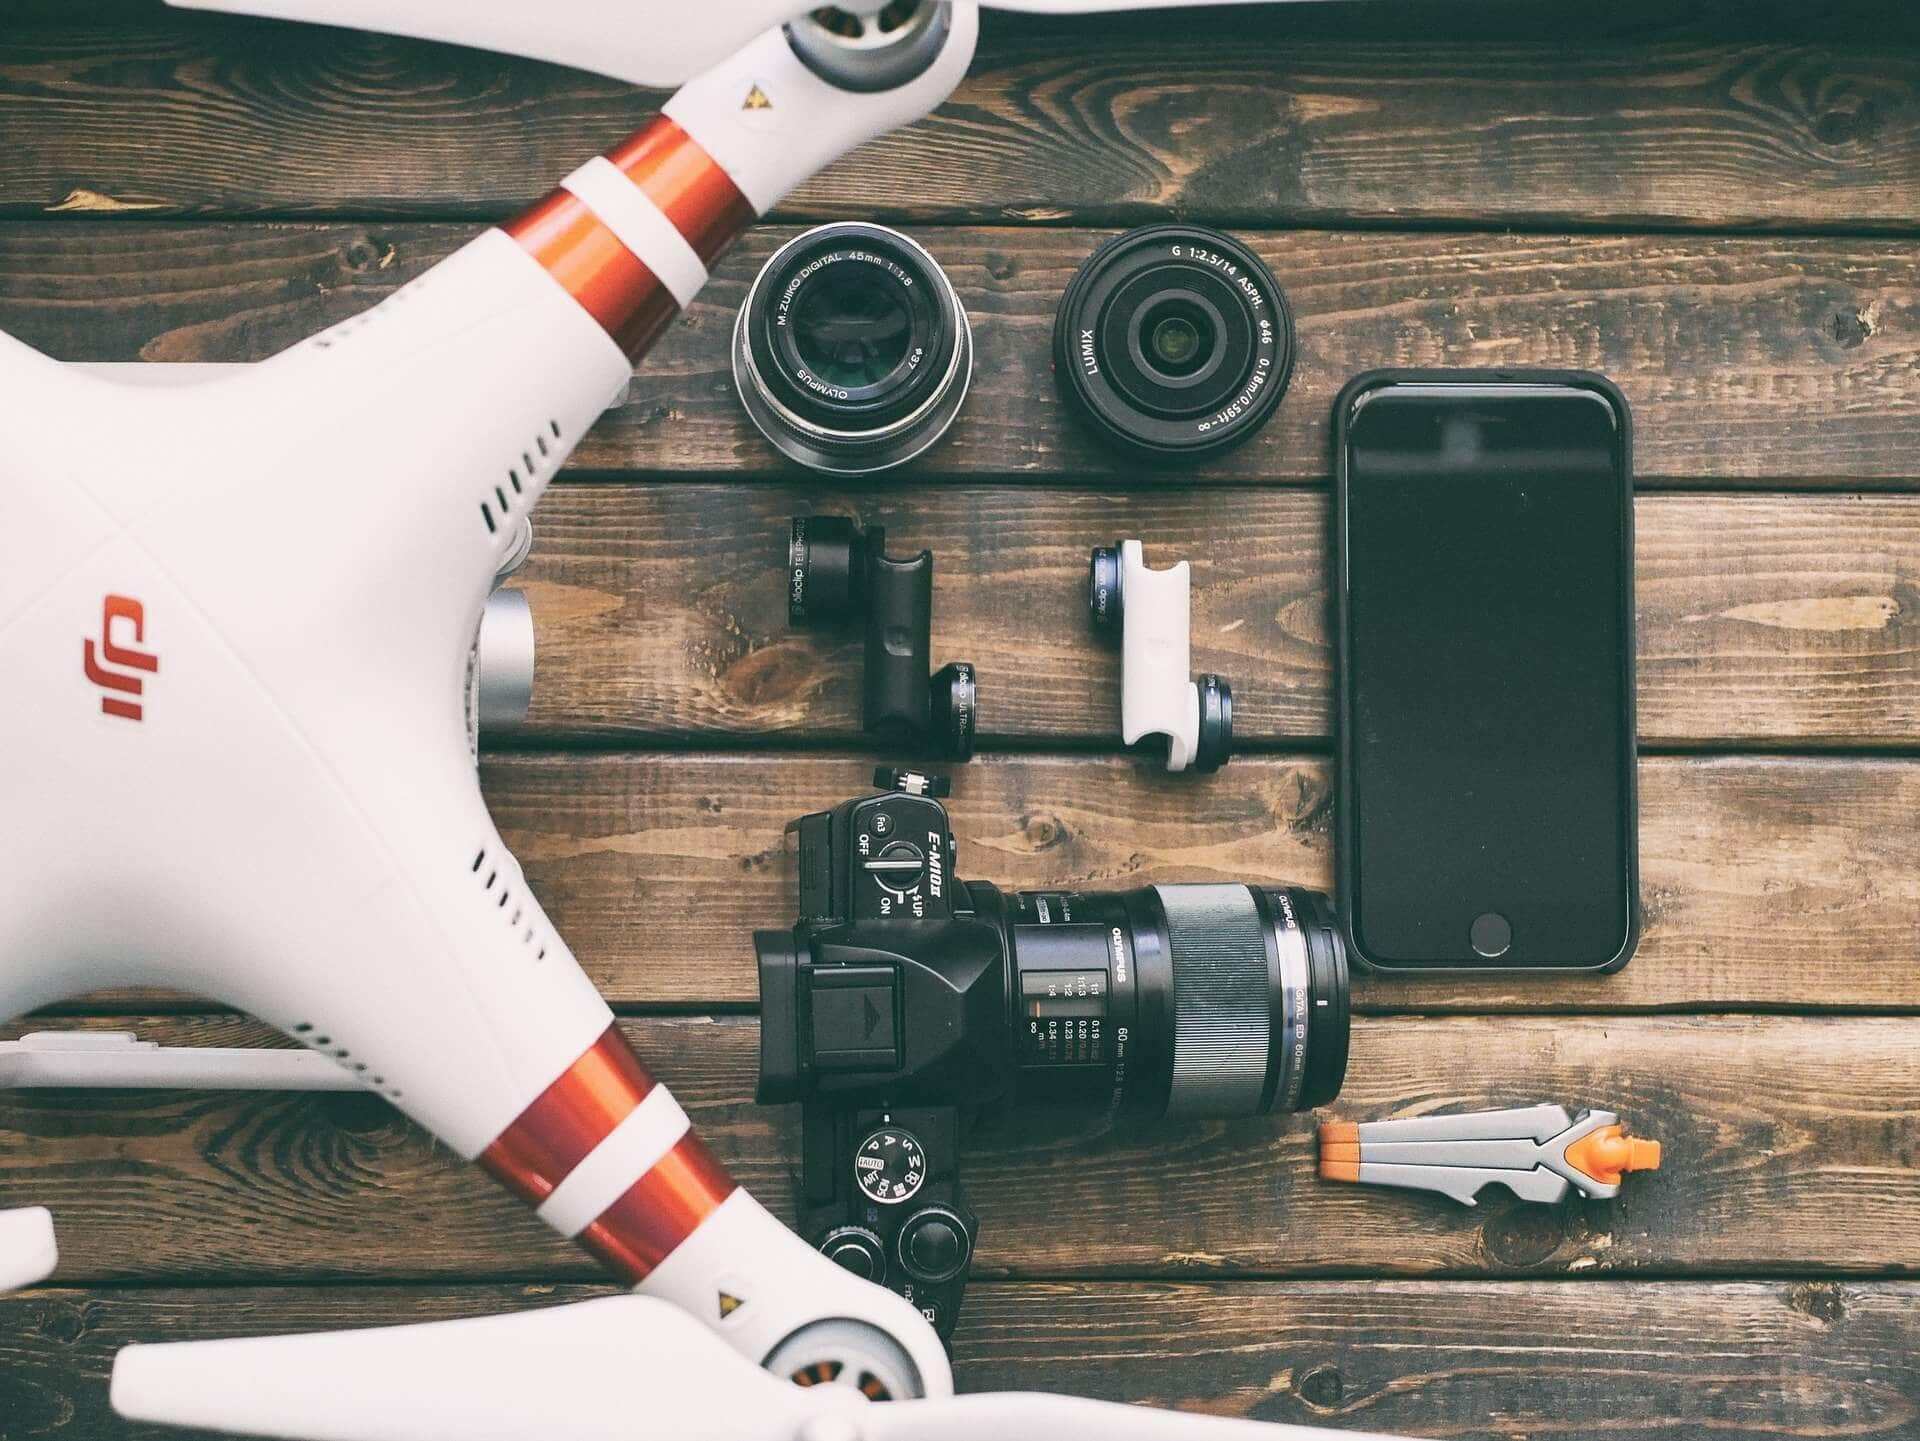 what-are-some-benefits-of-drones-and-smartphone-cameras